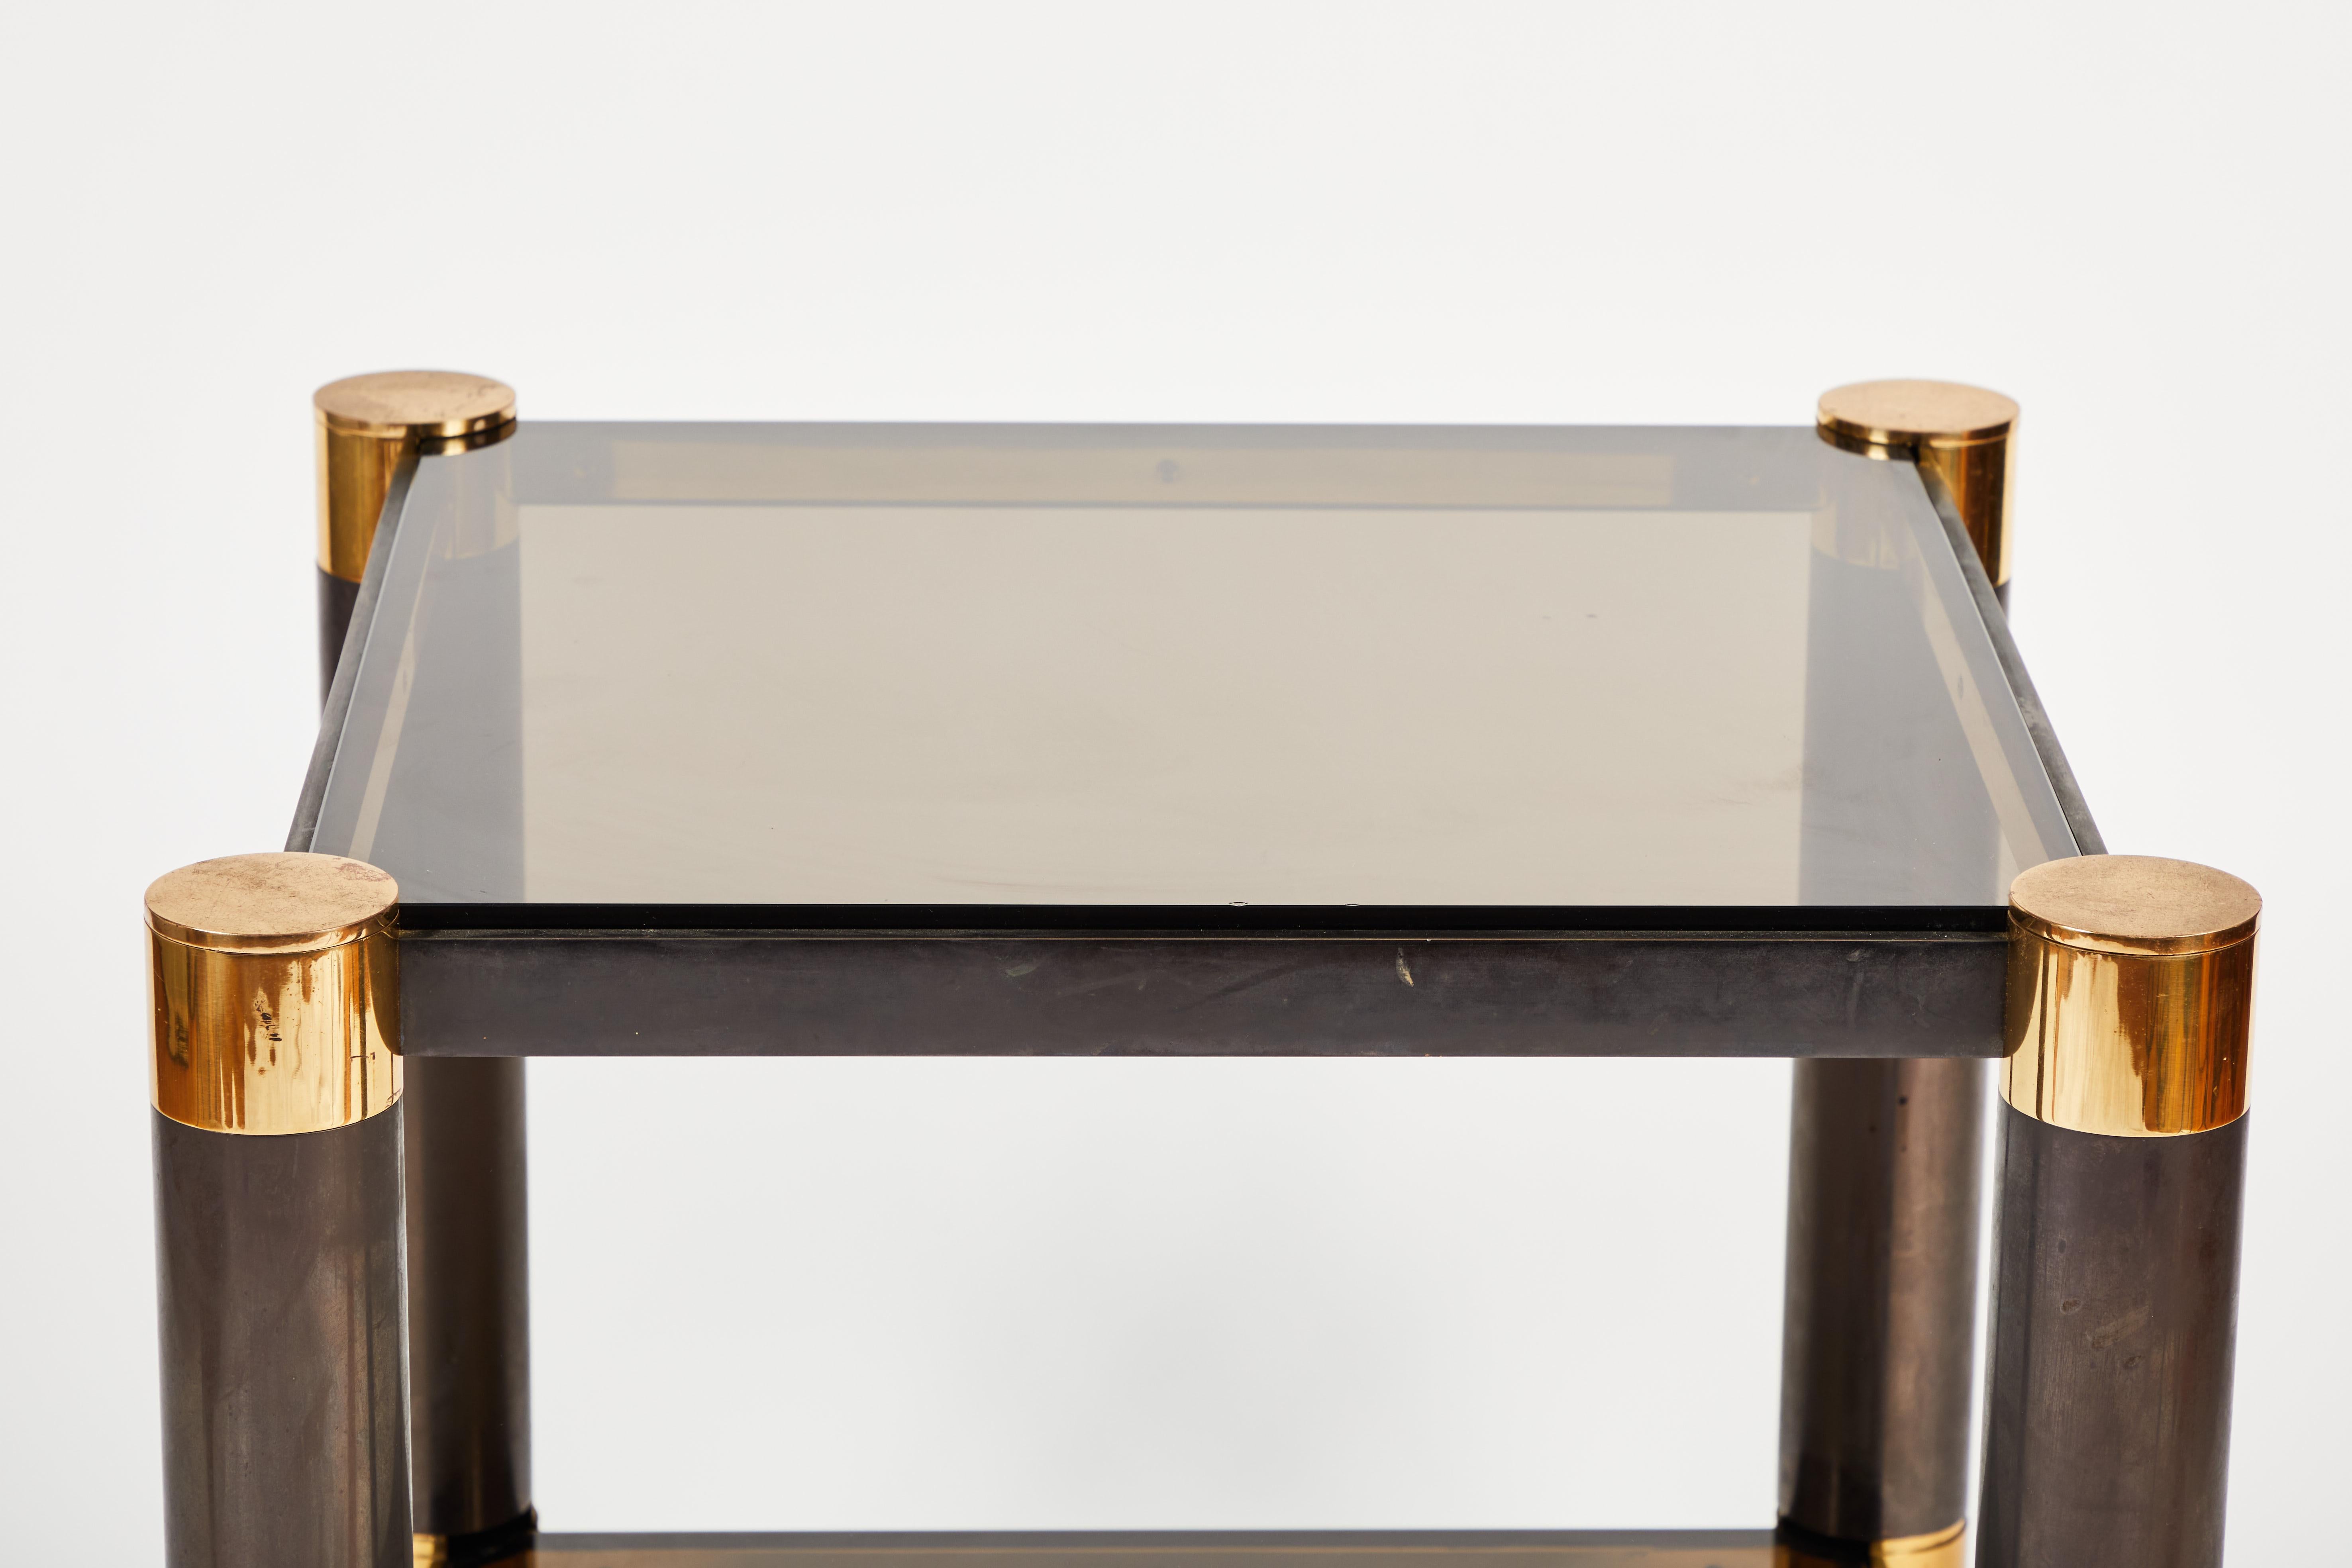 End table by Karl Springer in gunmetal, brass, glass and enameled wood. Crafted in New York circa 1980. This lovely piece has some light oxidation to the gunmetal and brass that is consistent with age. There are some scratches to the glass and light